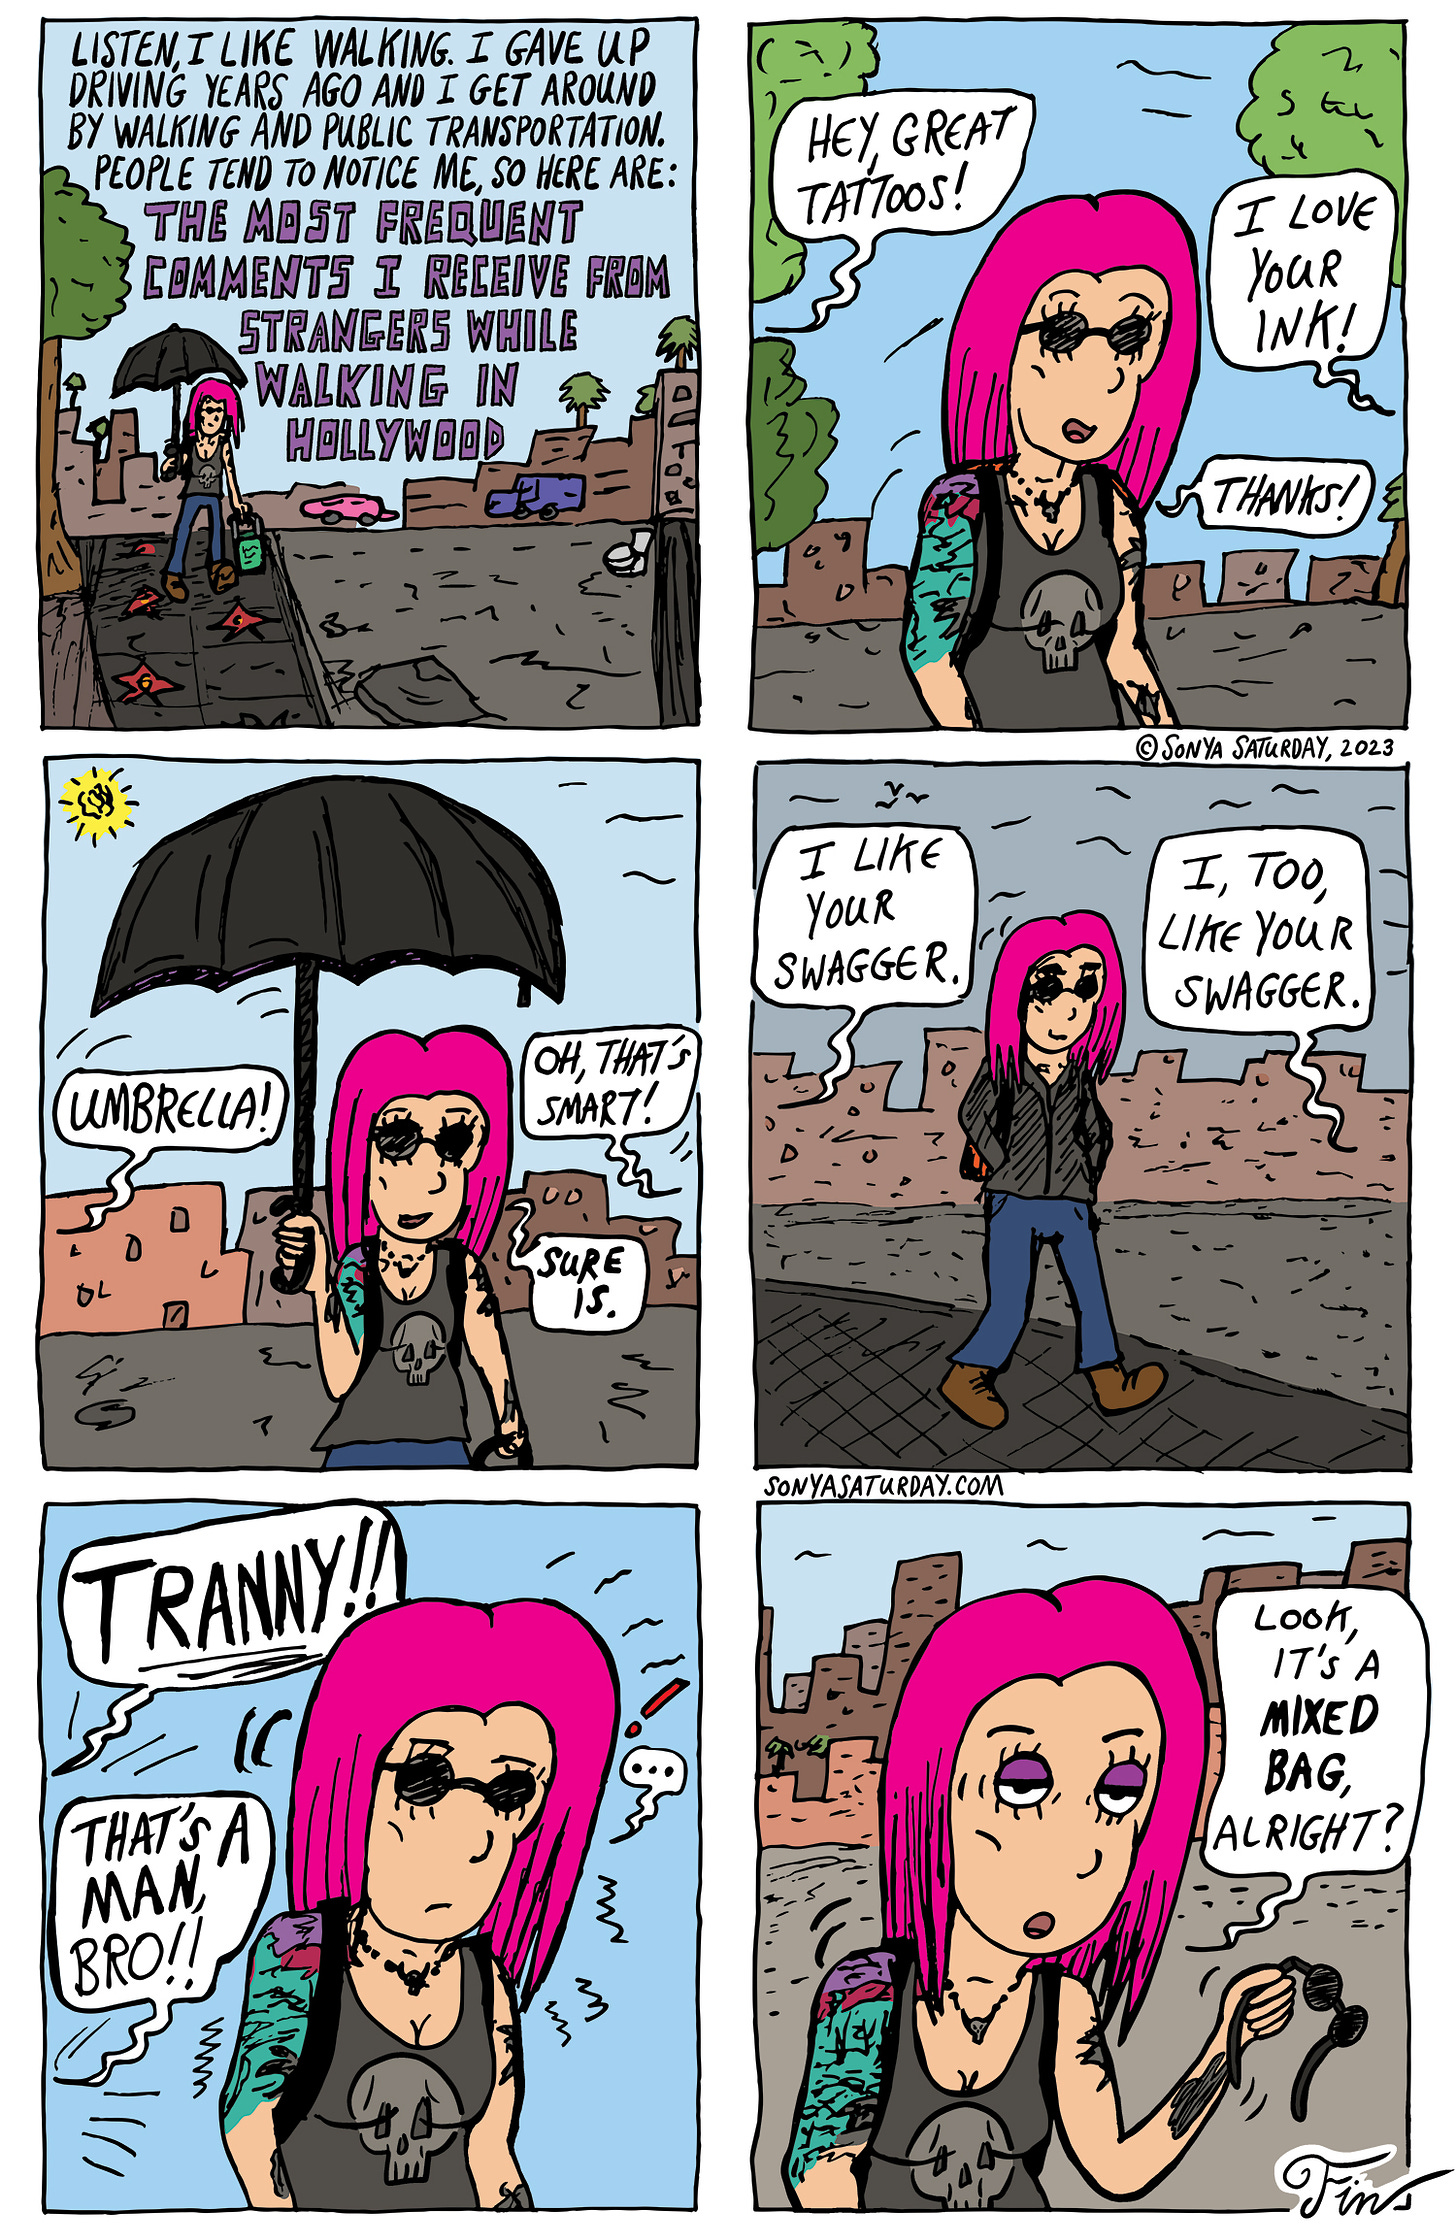 Comic strip about people shouting remarks at Sonya Saturday while she walks through Hollywood